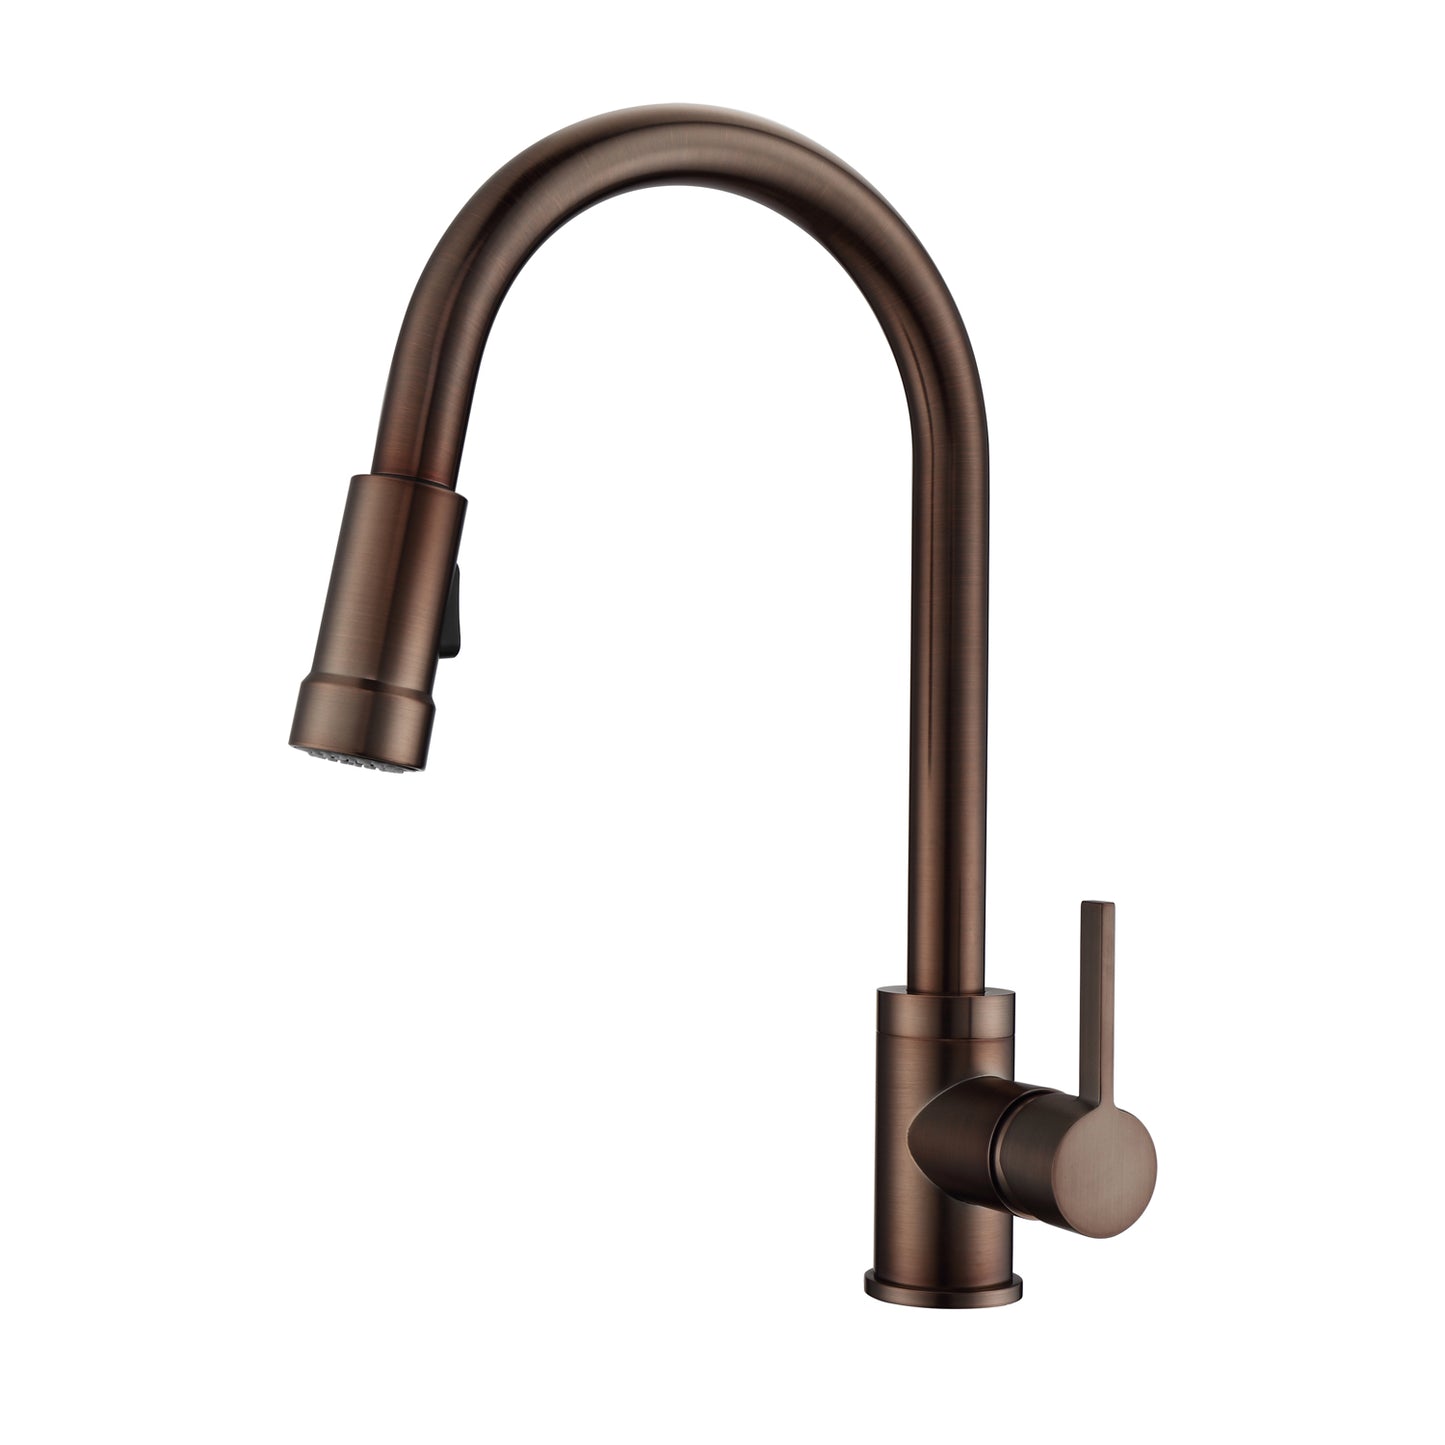 Firth 1 Kitchen Faucet, Pull-Out Sprayer, Single Lever Handle, Oil Rubbed Bronze